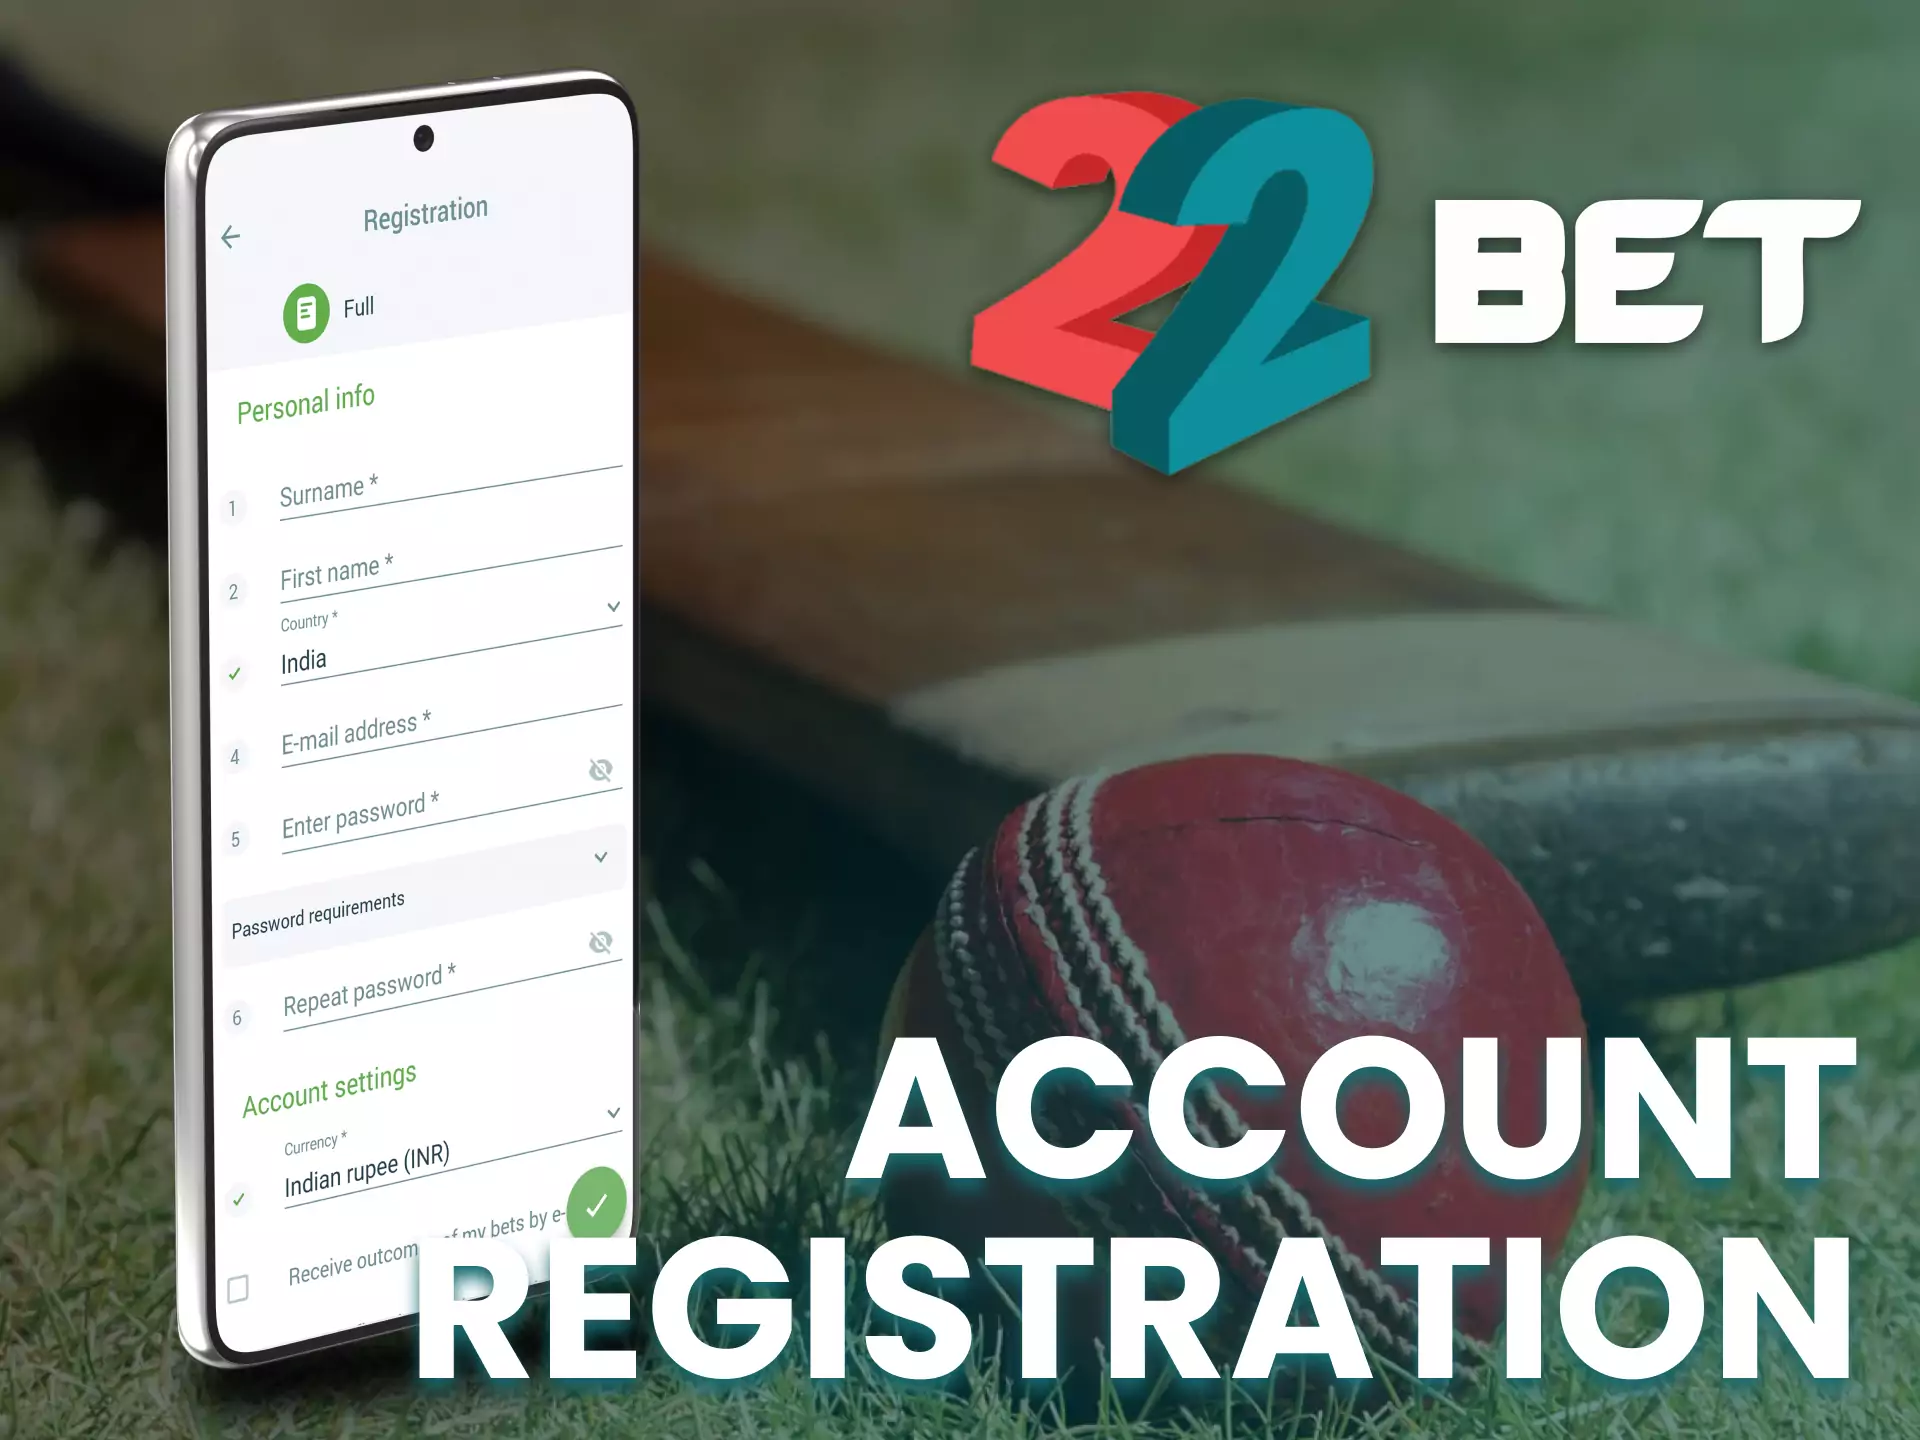 Complete a simple registration at 22bet.